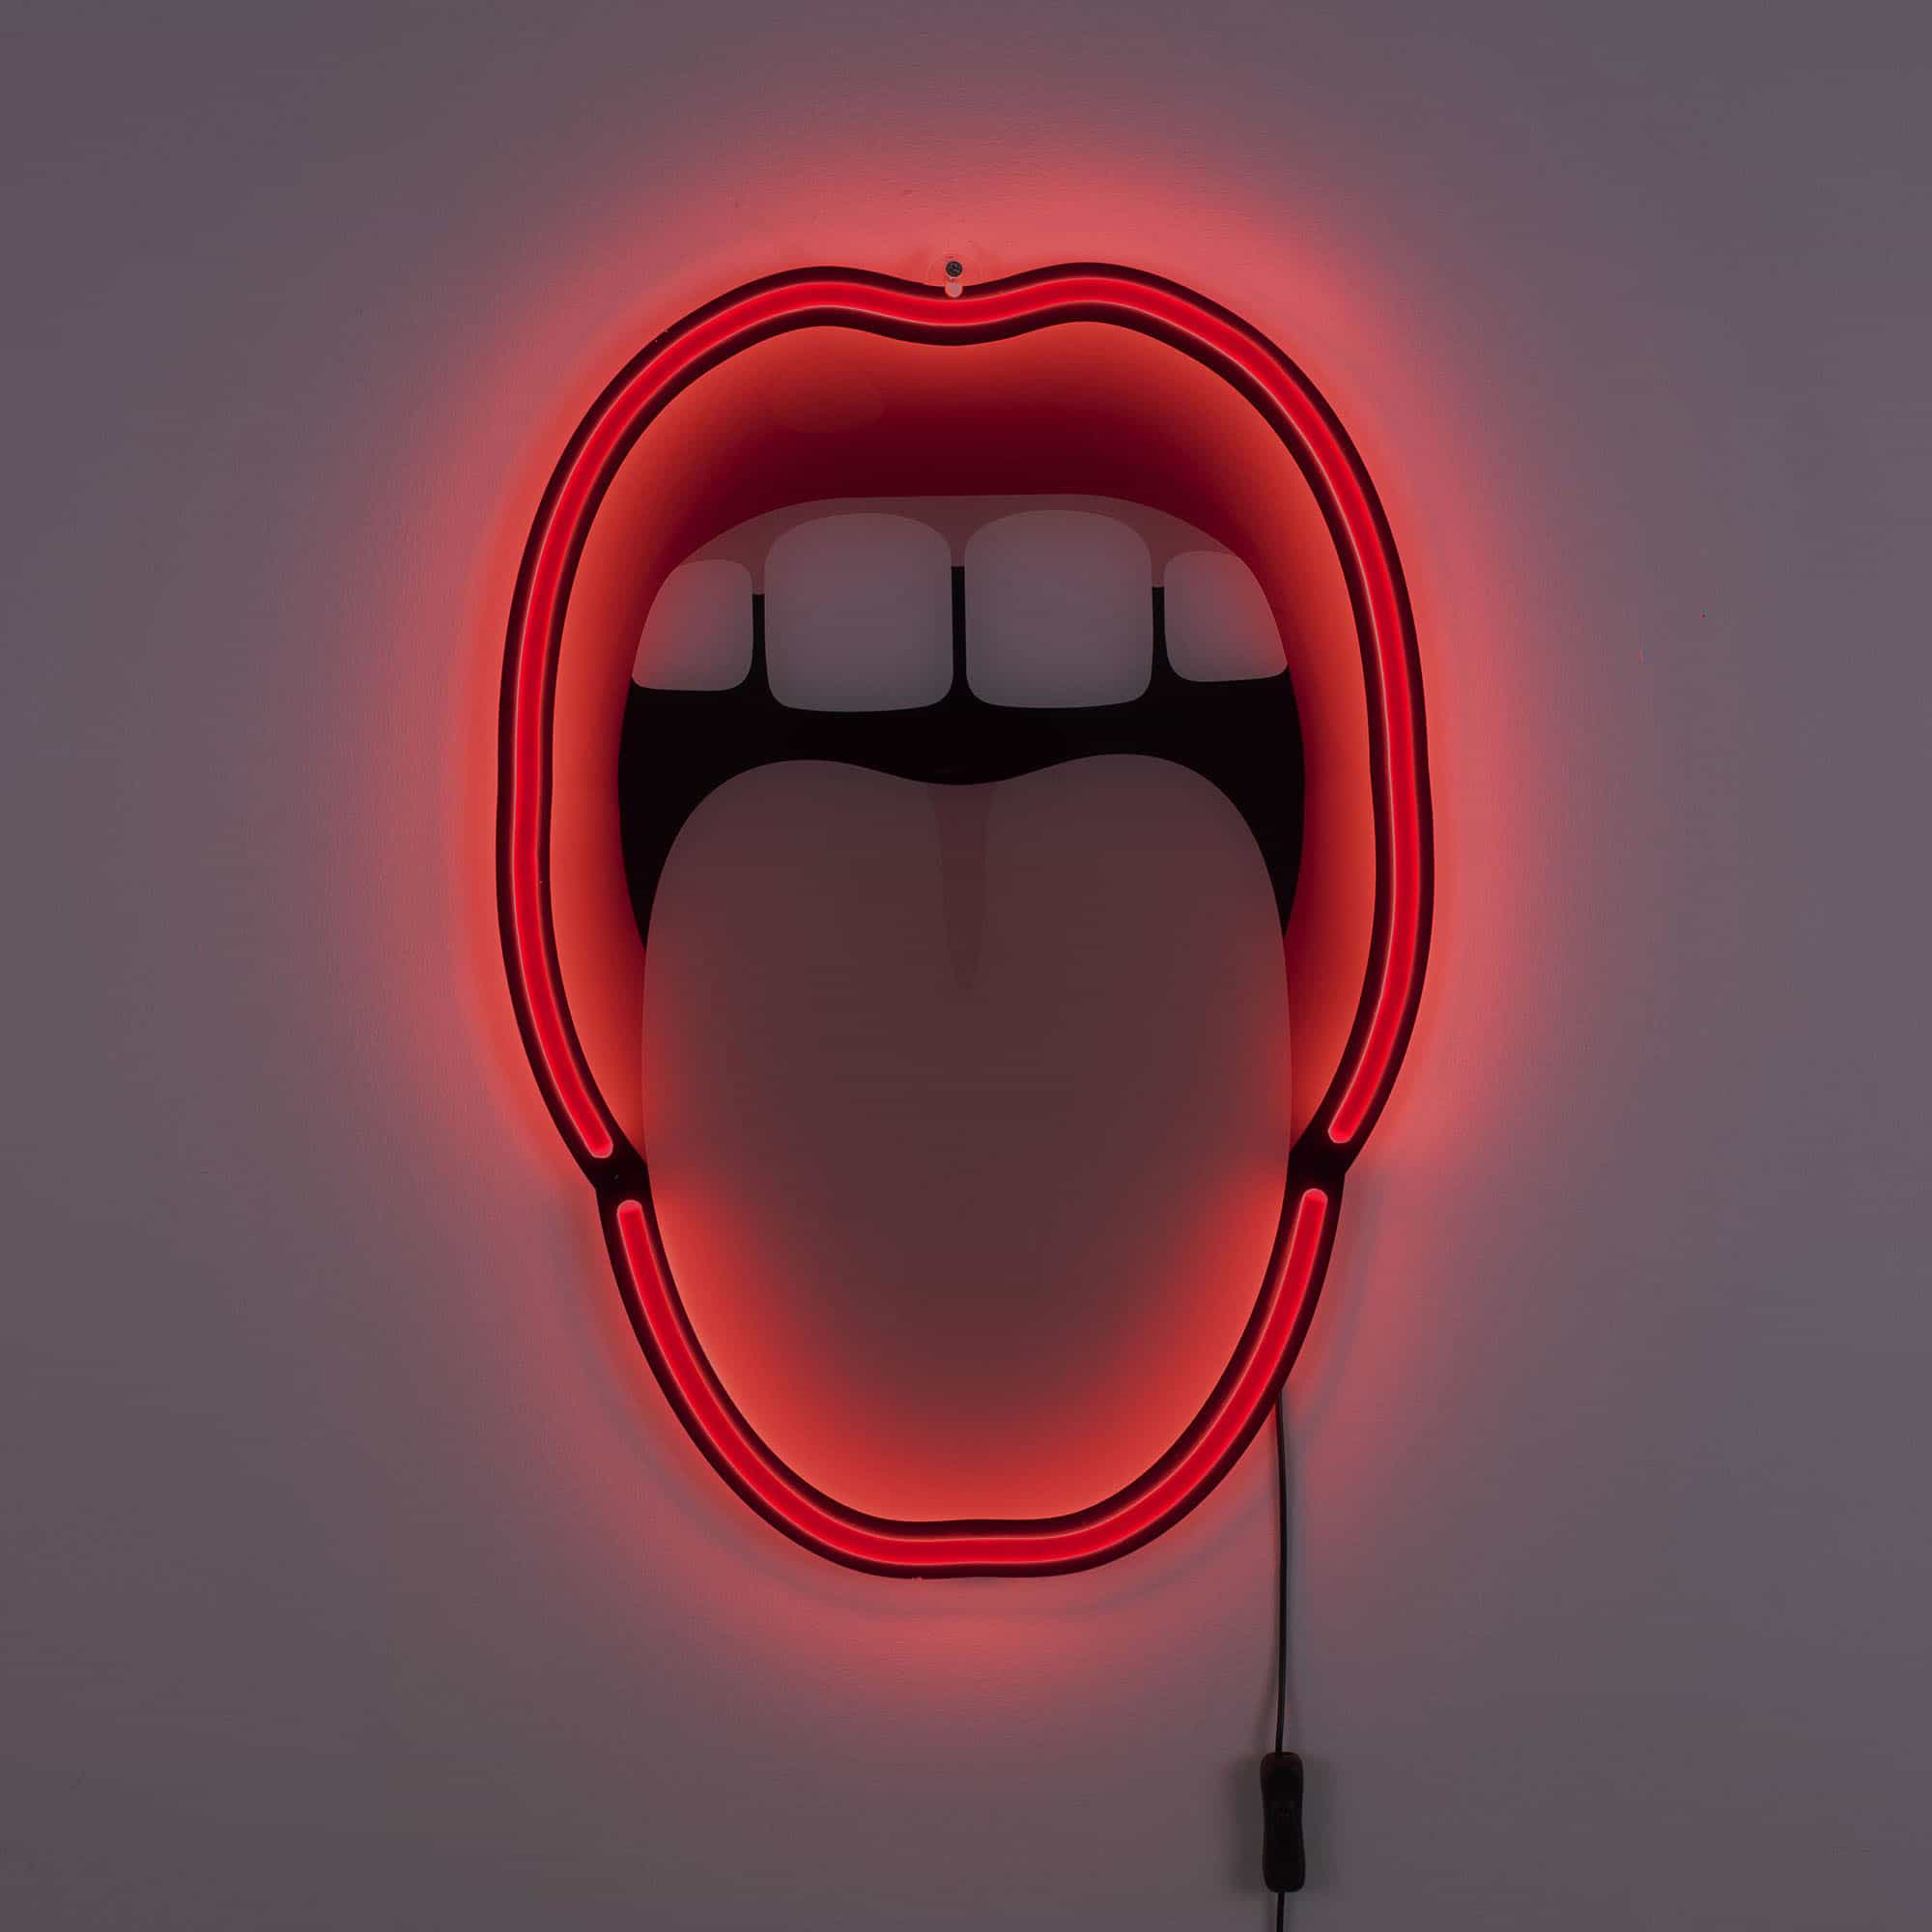 Led Neon Signs